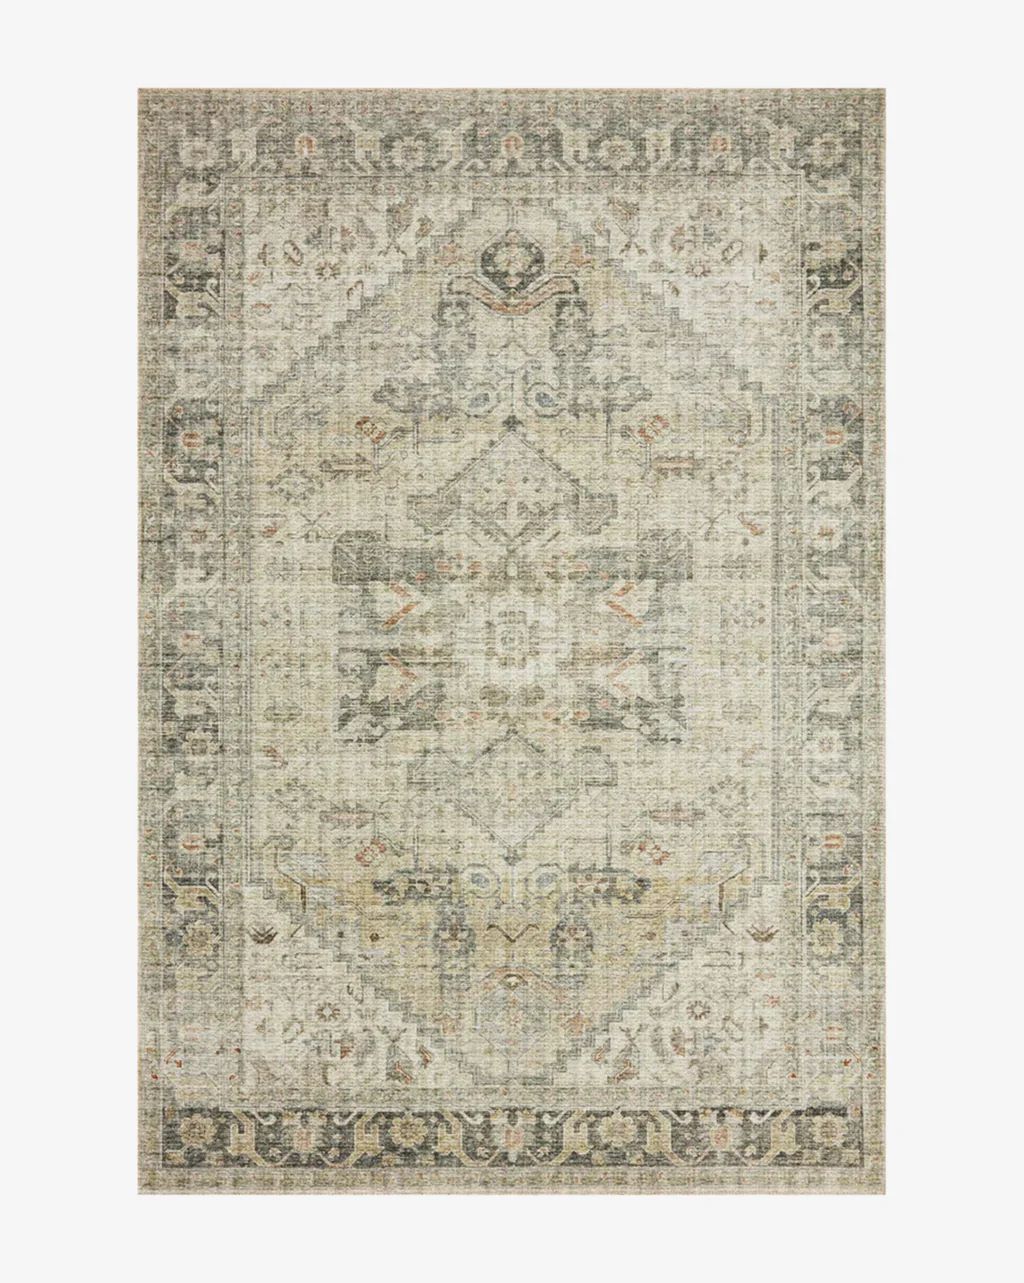 Cassis Patterned Rug | McGee & Co.